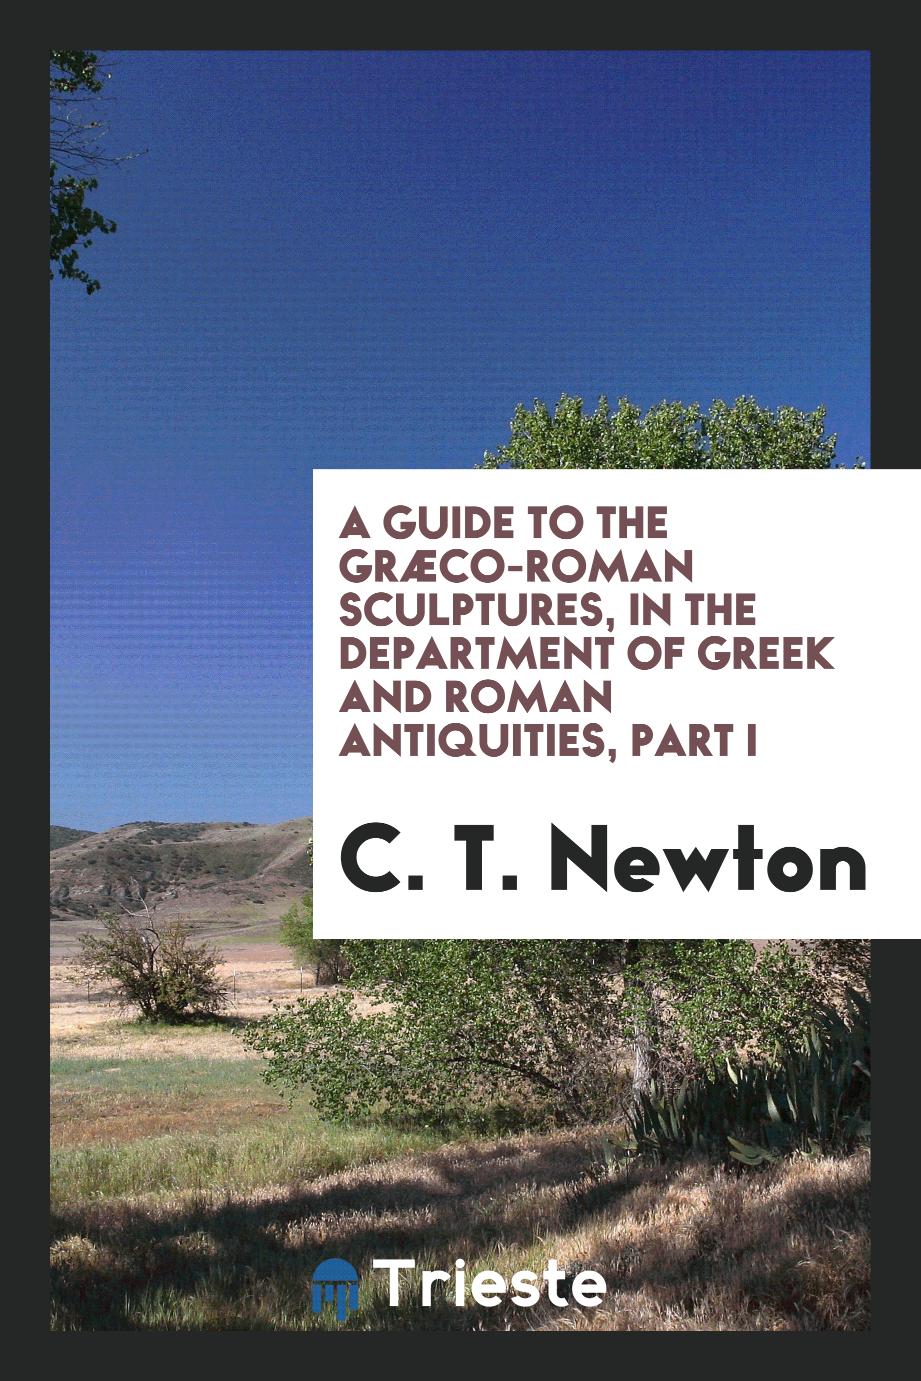 A Guide to the Græco-Roman Sculptures, in the Department of Greek and Roman Antiquities, Part I